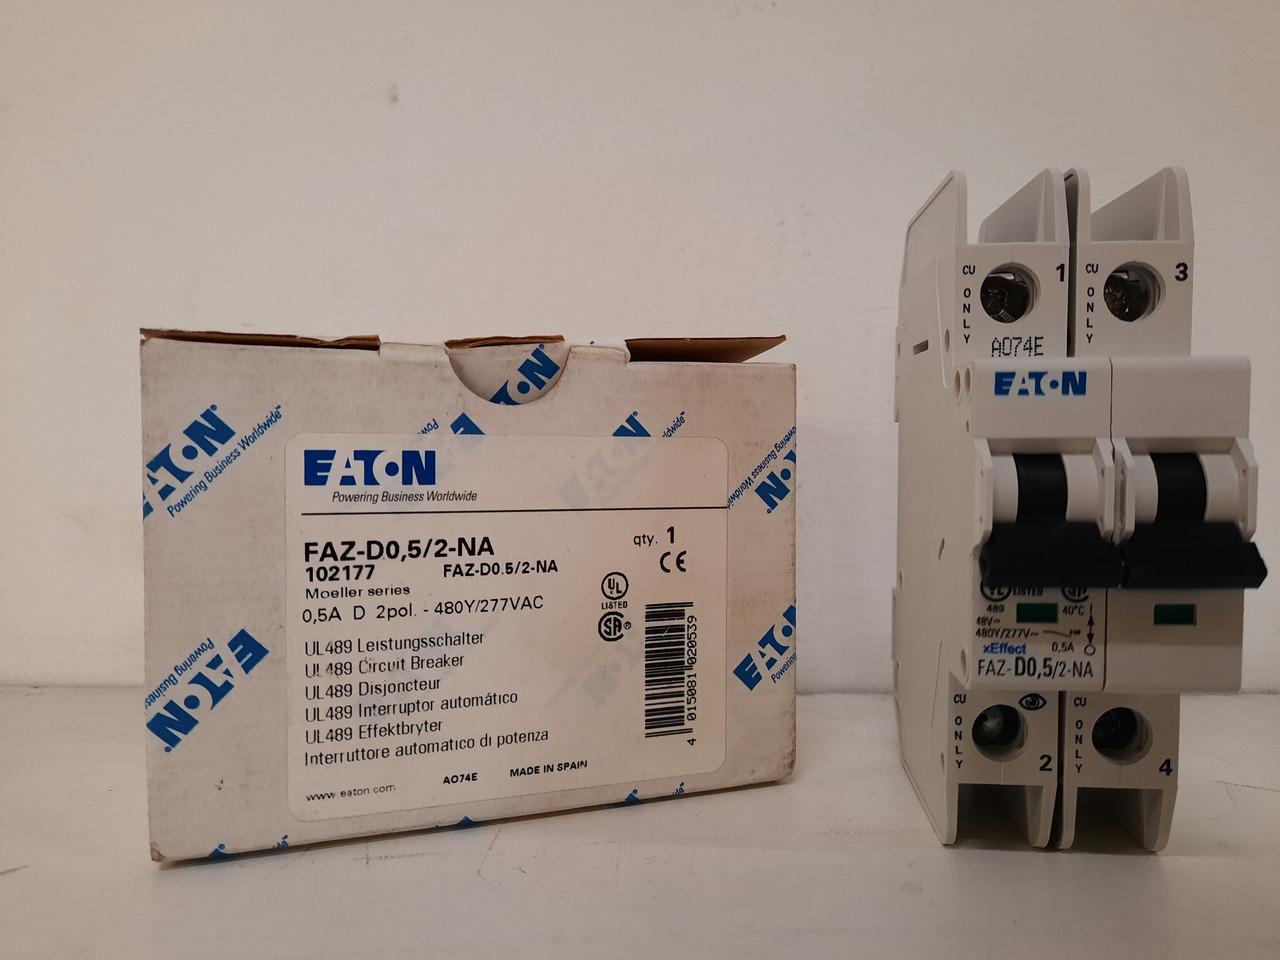 Eaton FAZ-D0.5/2-NA 277/480 VAC 50/60 Hz, 0.5 A, 2-Pole, 10/14 kA, 10 to 20 x Rated Current, Screw Terminal, DIN Rail Mount, Standard Packaging, D-Curve, Current Limiting, Thermal Magnetic